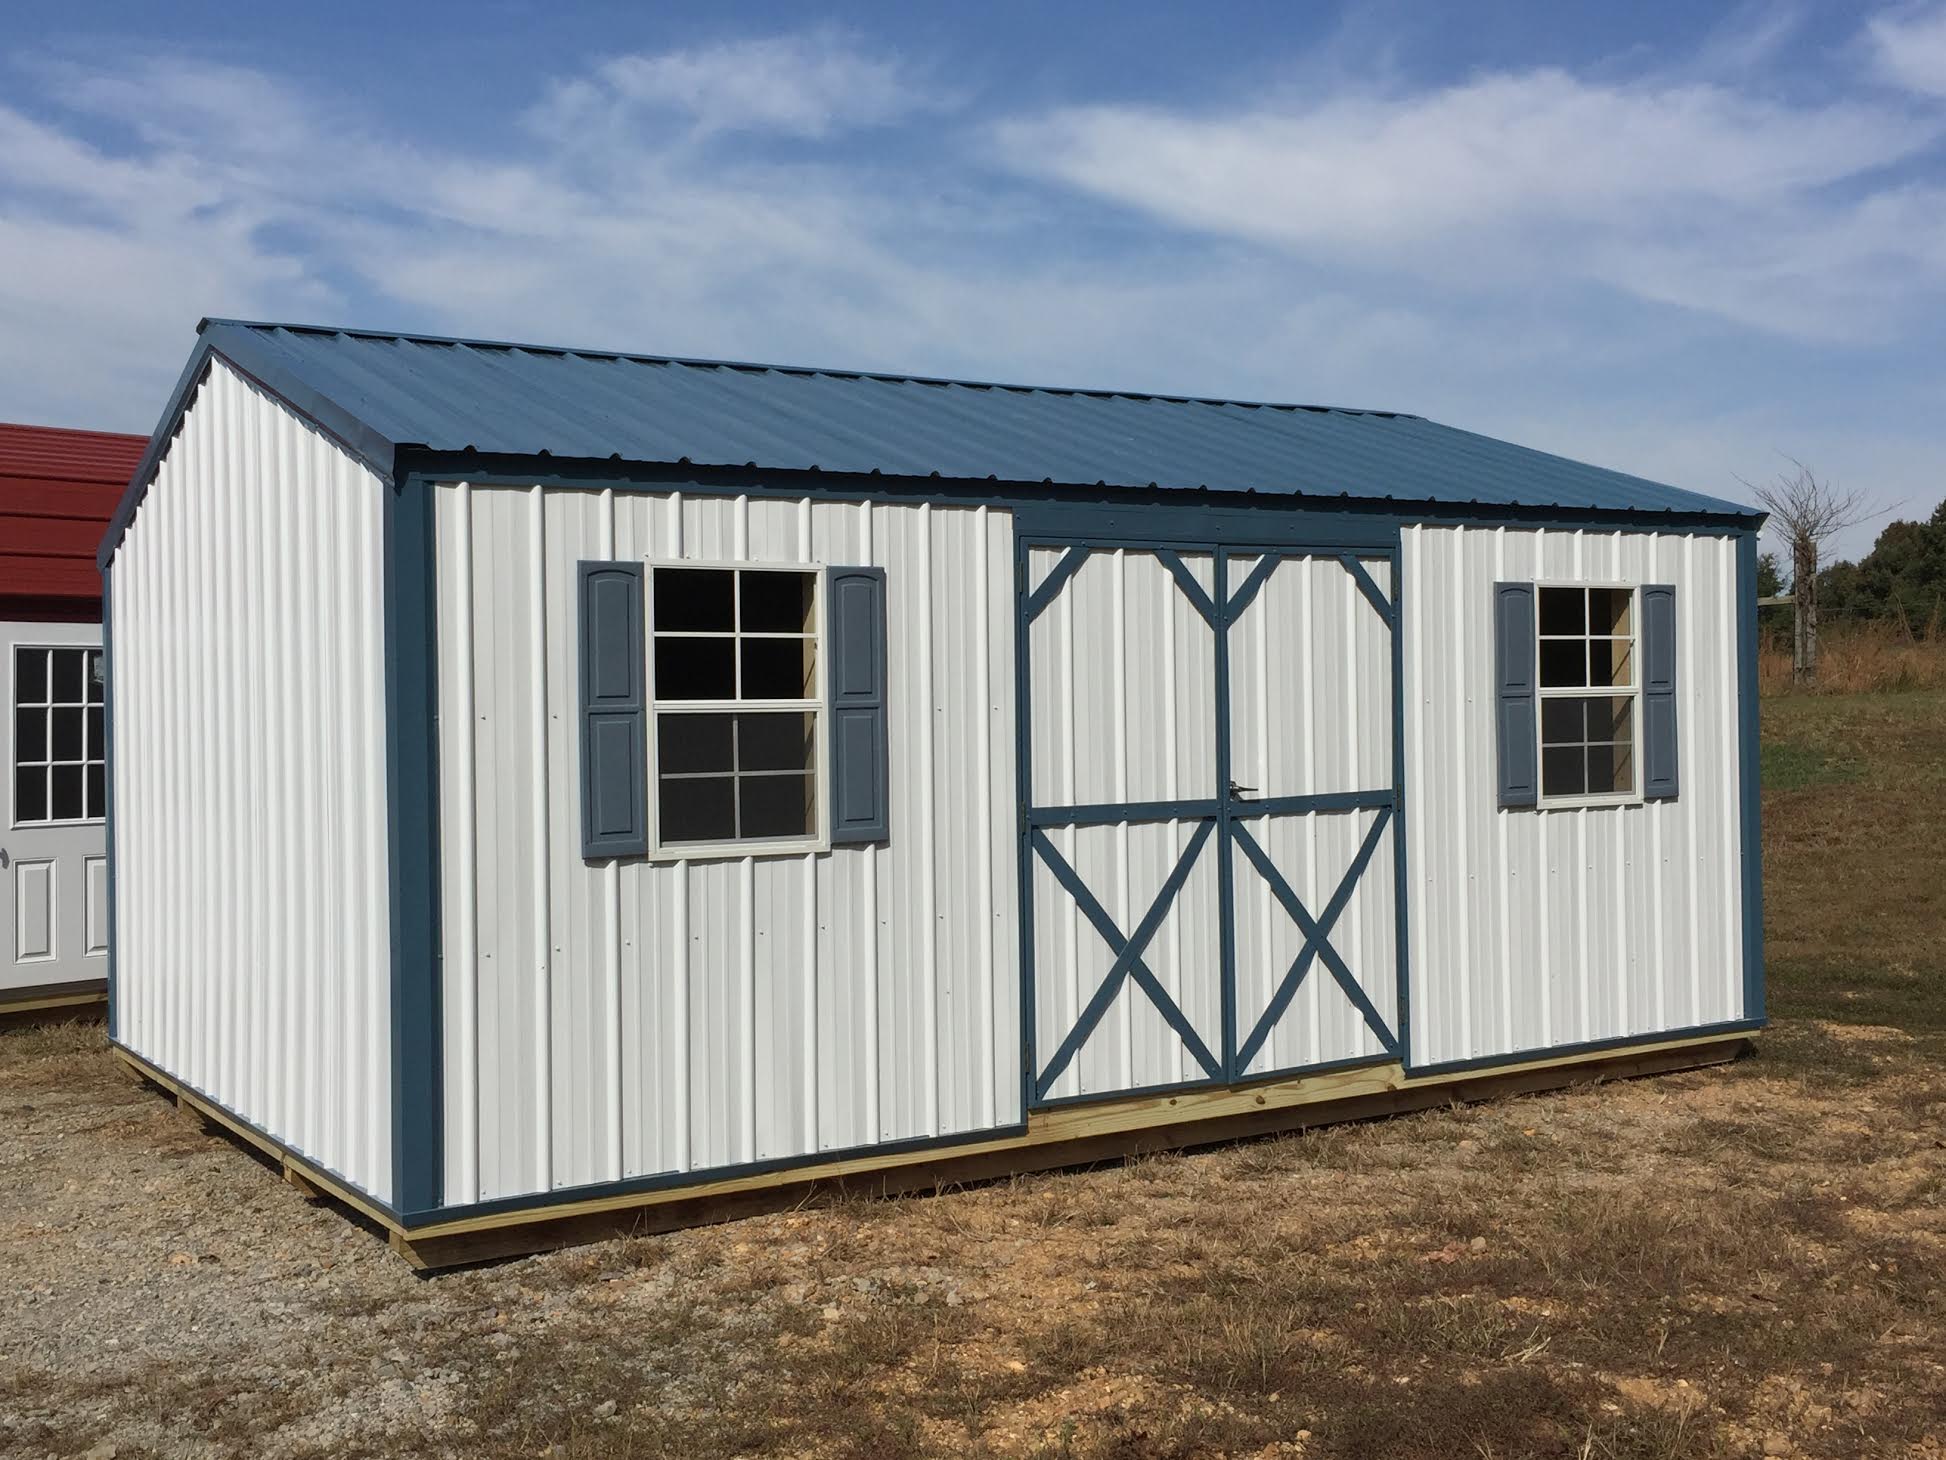 White metal true garden shed with blue trim and roof